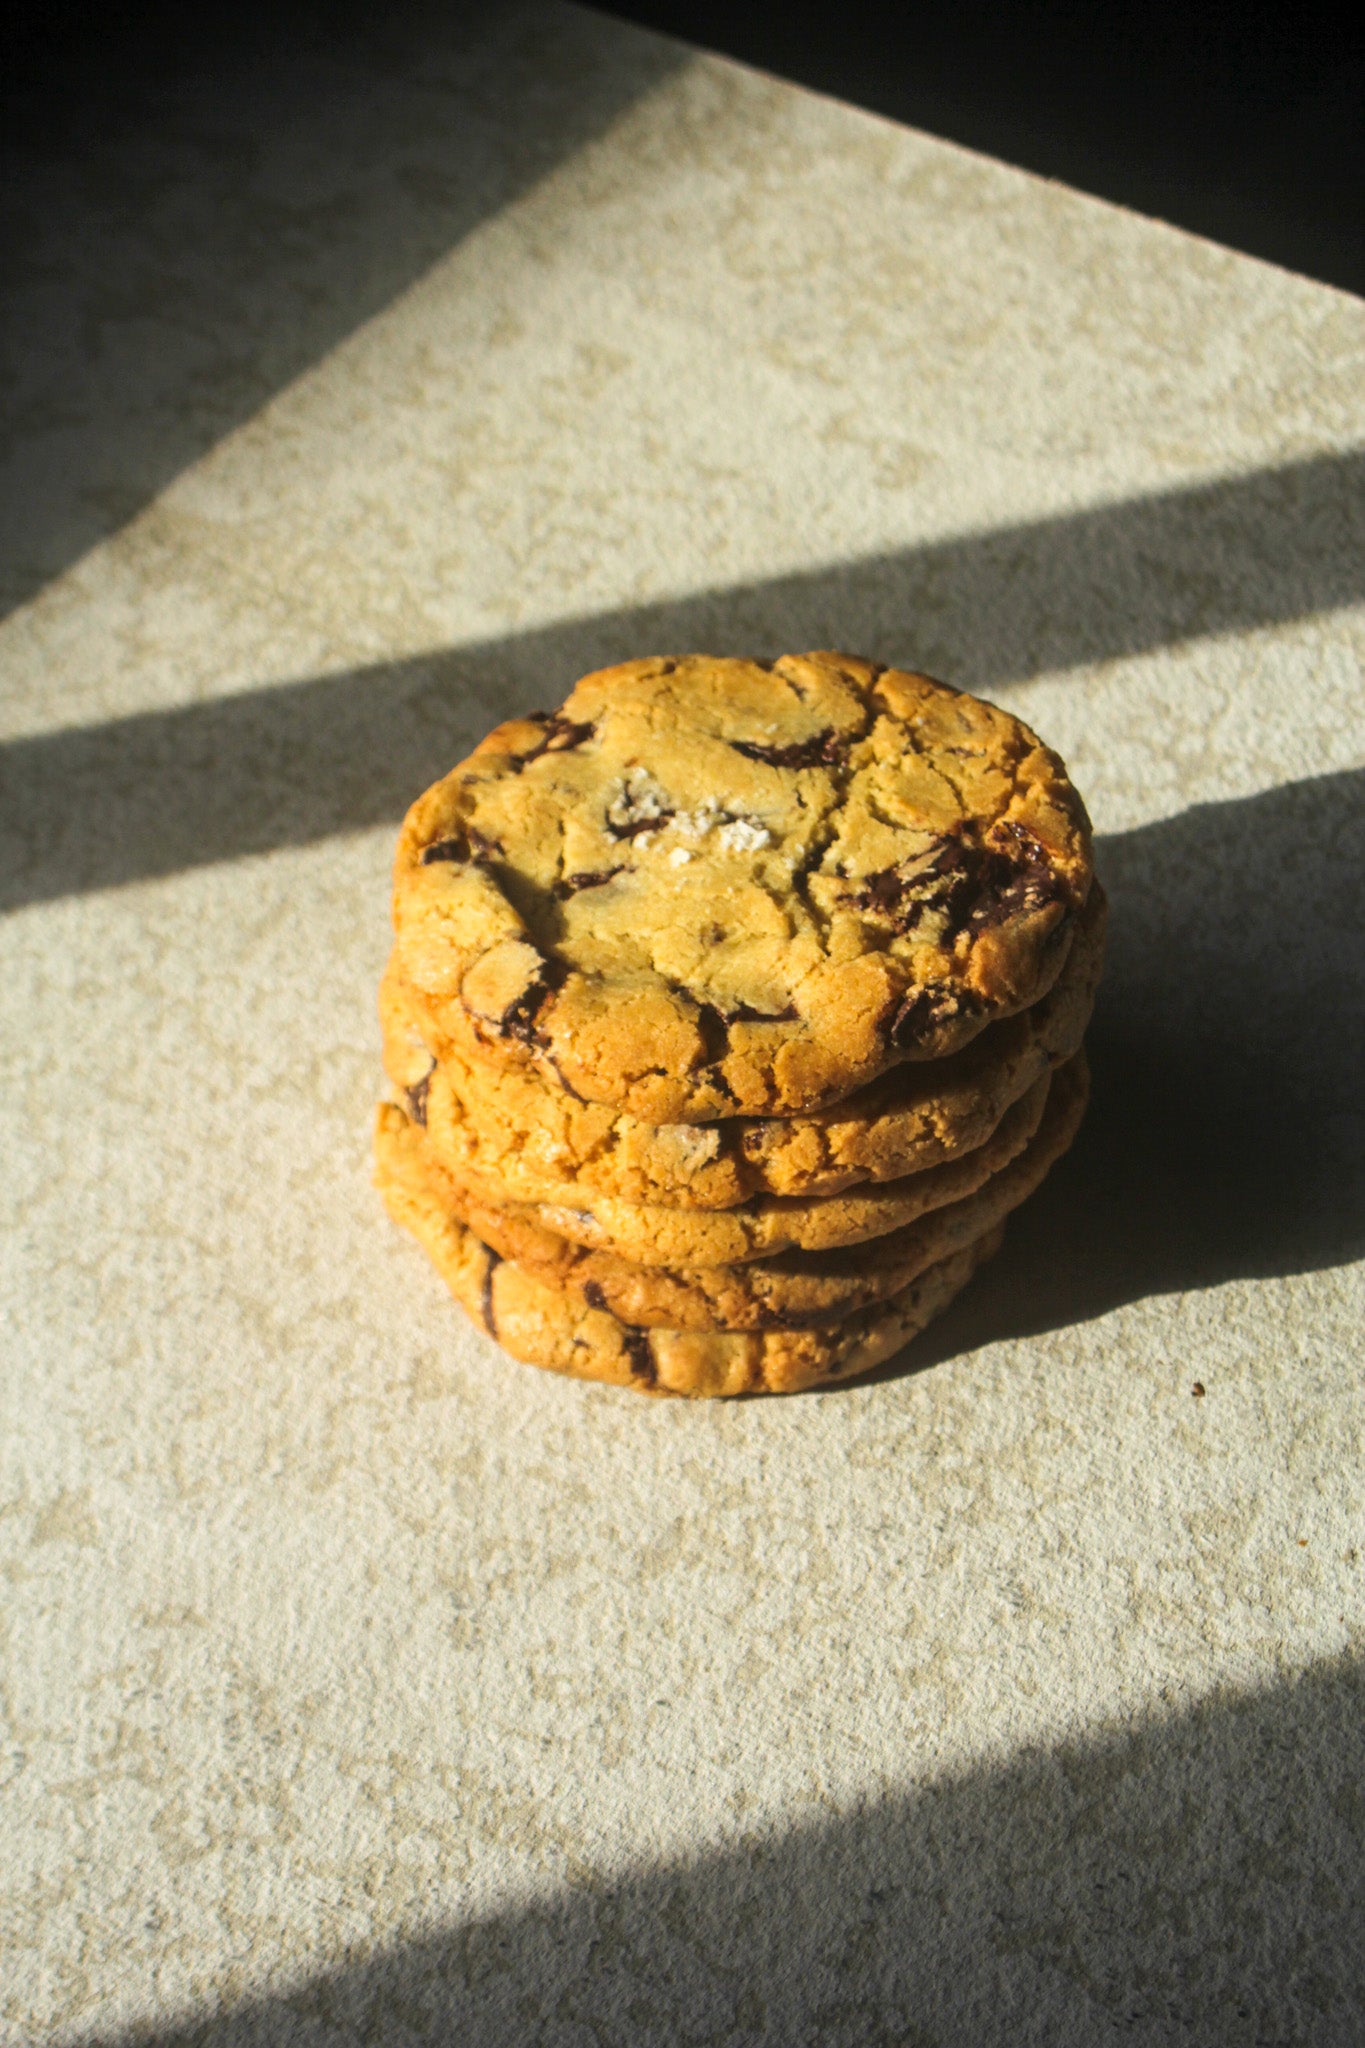 Salted Choc Chip Cookie (5-pack)